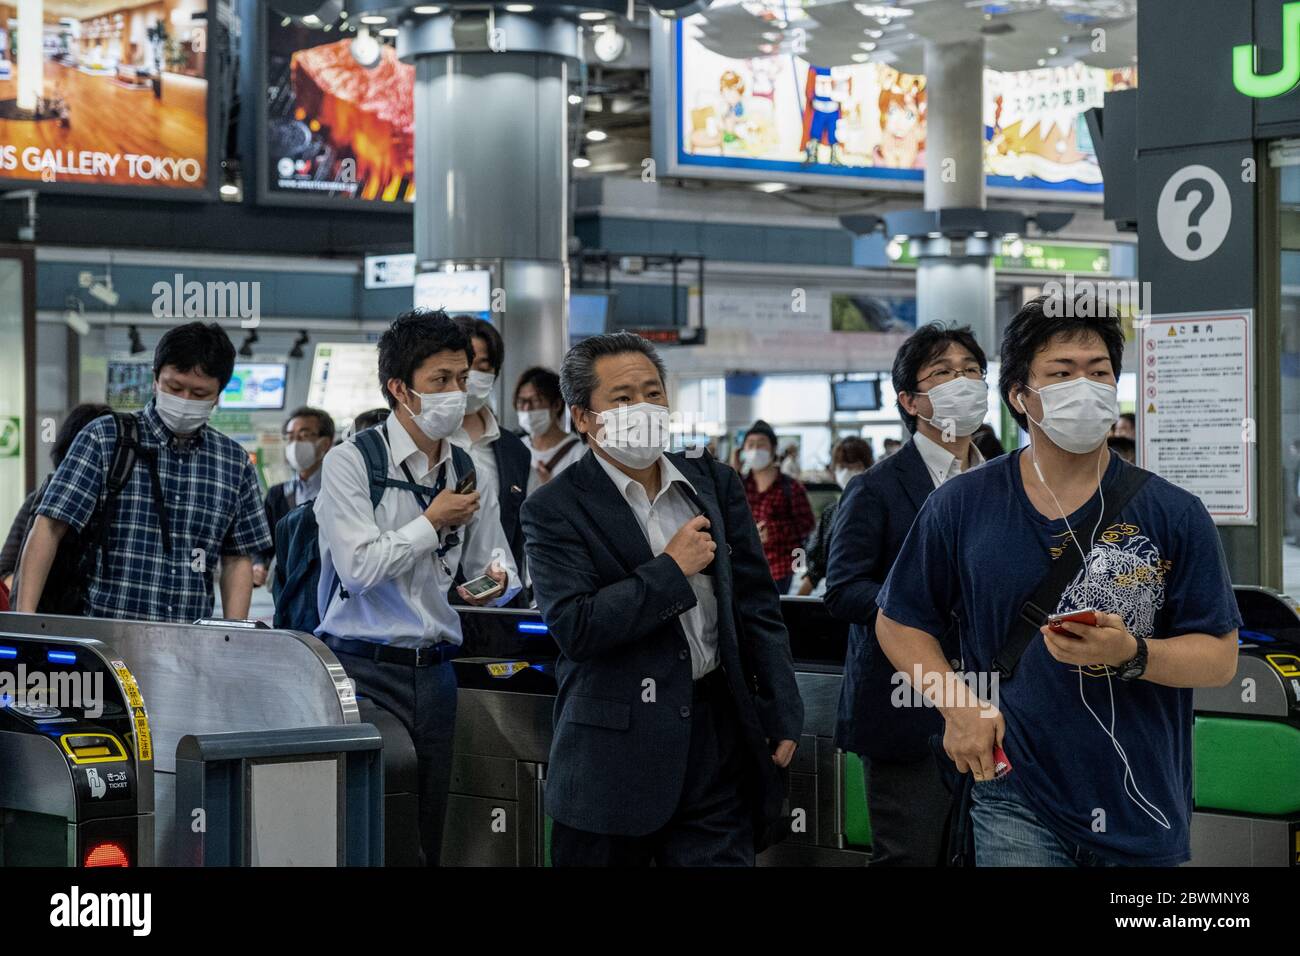 Tokyo, Japan. 02nd June, 2020. People walking inside the Shingawa Station seen wearing face masks as a precaution against the spread of coronavirus.Japan government lifted Coronavirus State of Emergency last week. Tokyo Governor Yuriko Koike is set to issue what she has dubbed a 'Tokyo Alert' if cases continue to climb, the city has said it may call for people to stay home again. Japan Health Ministry recorded a total of 16,884 infections, 892 death and 14,502 recovered since the beginning of the outbreak. Credit: SOPA Images Limited/Alamy Live News Stock Photo